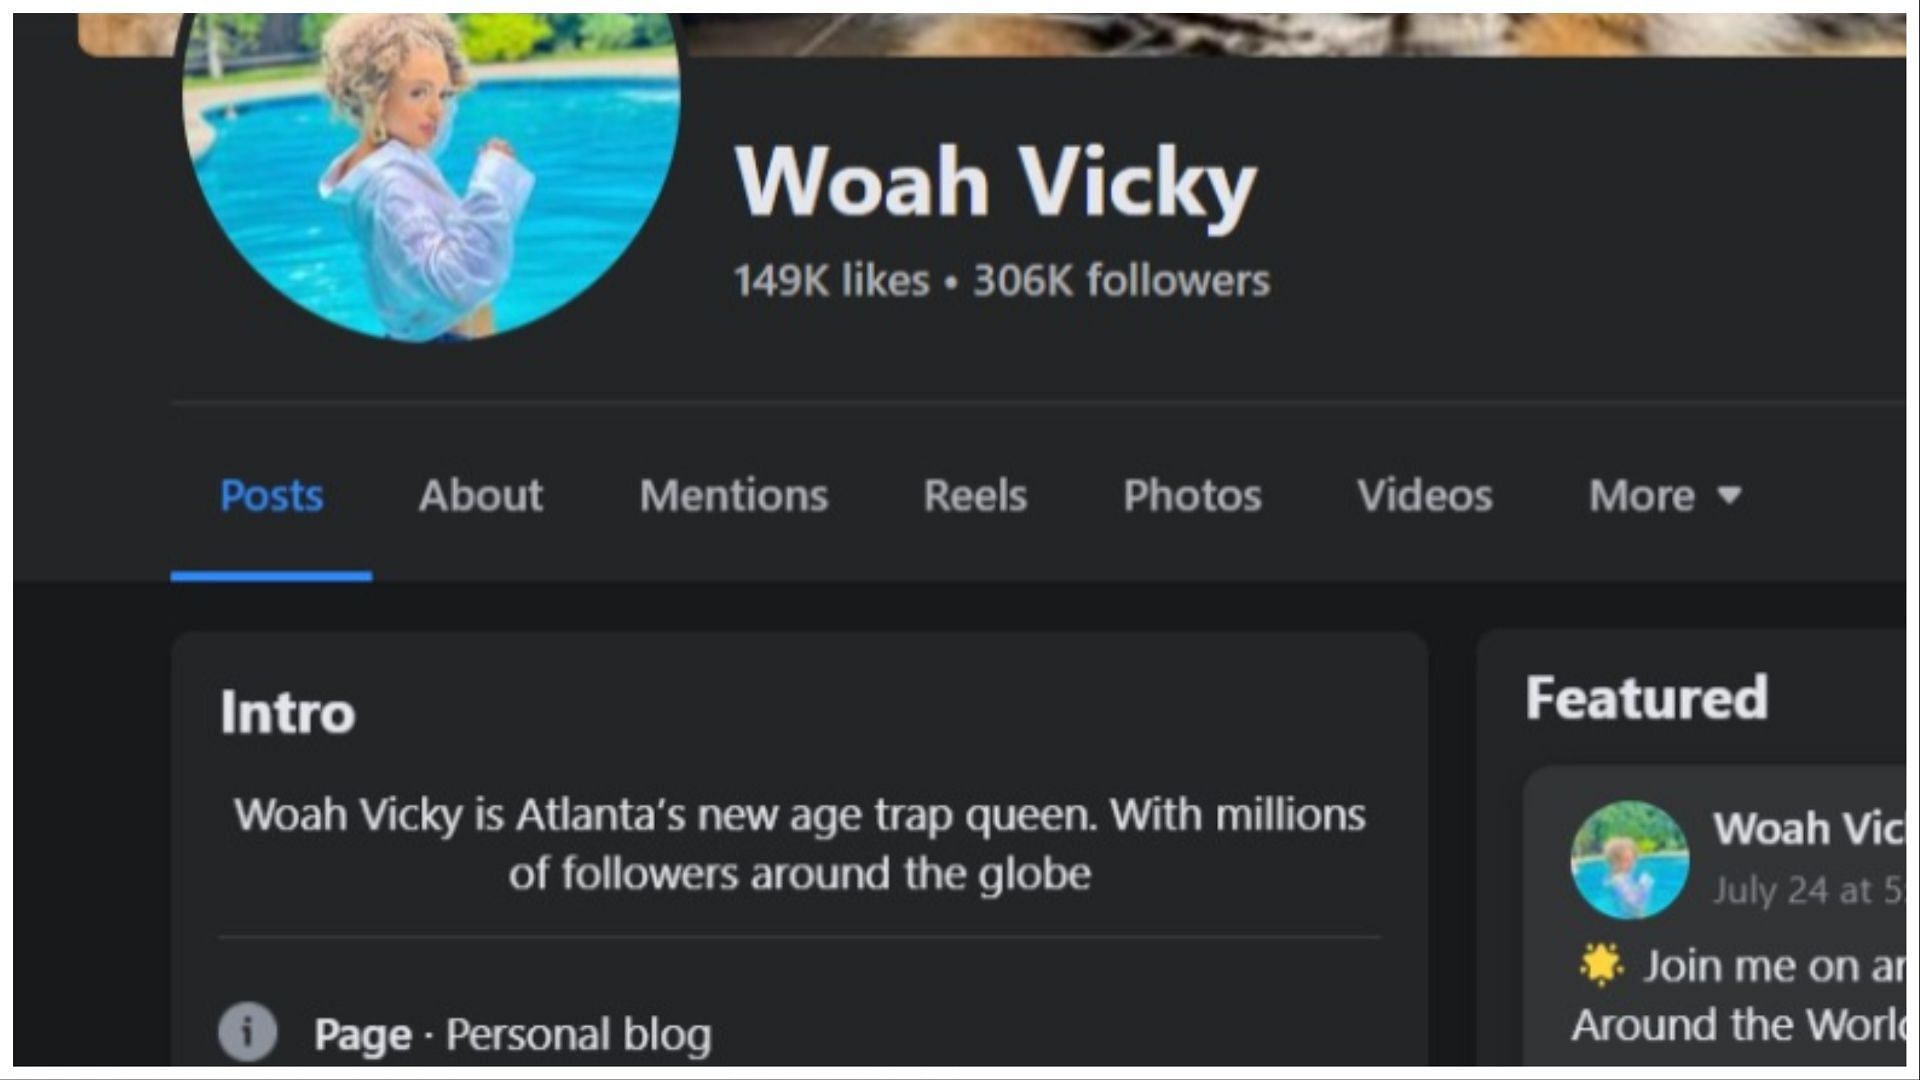 Woah Vicky's Facebook page mentions her as a trap queen (Image via Facebook / Woah Vicky)